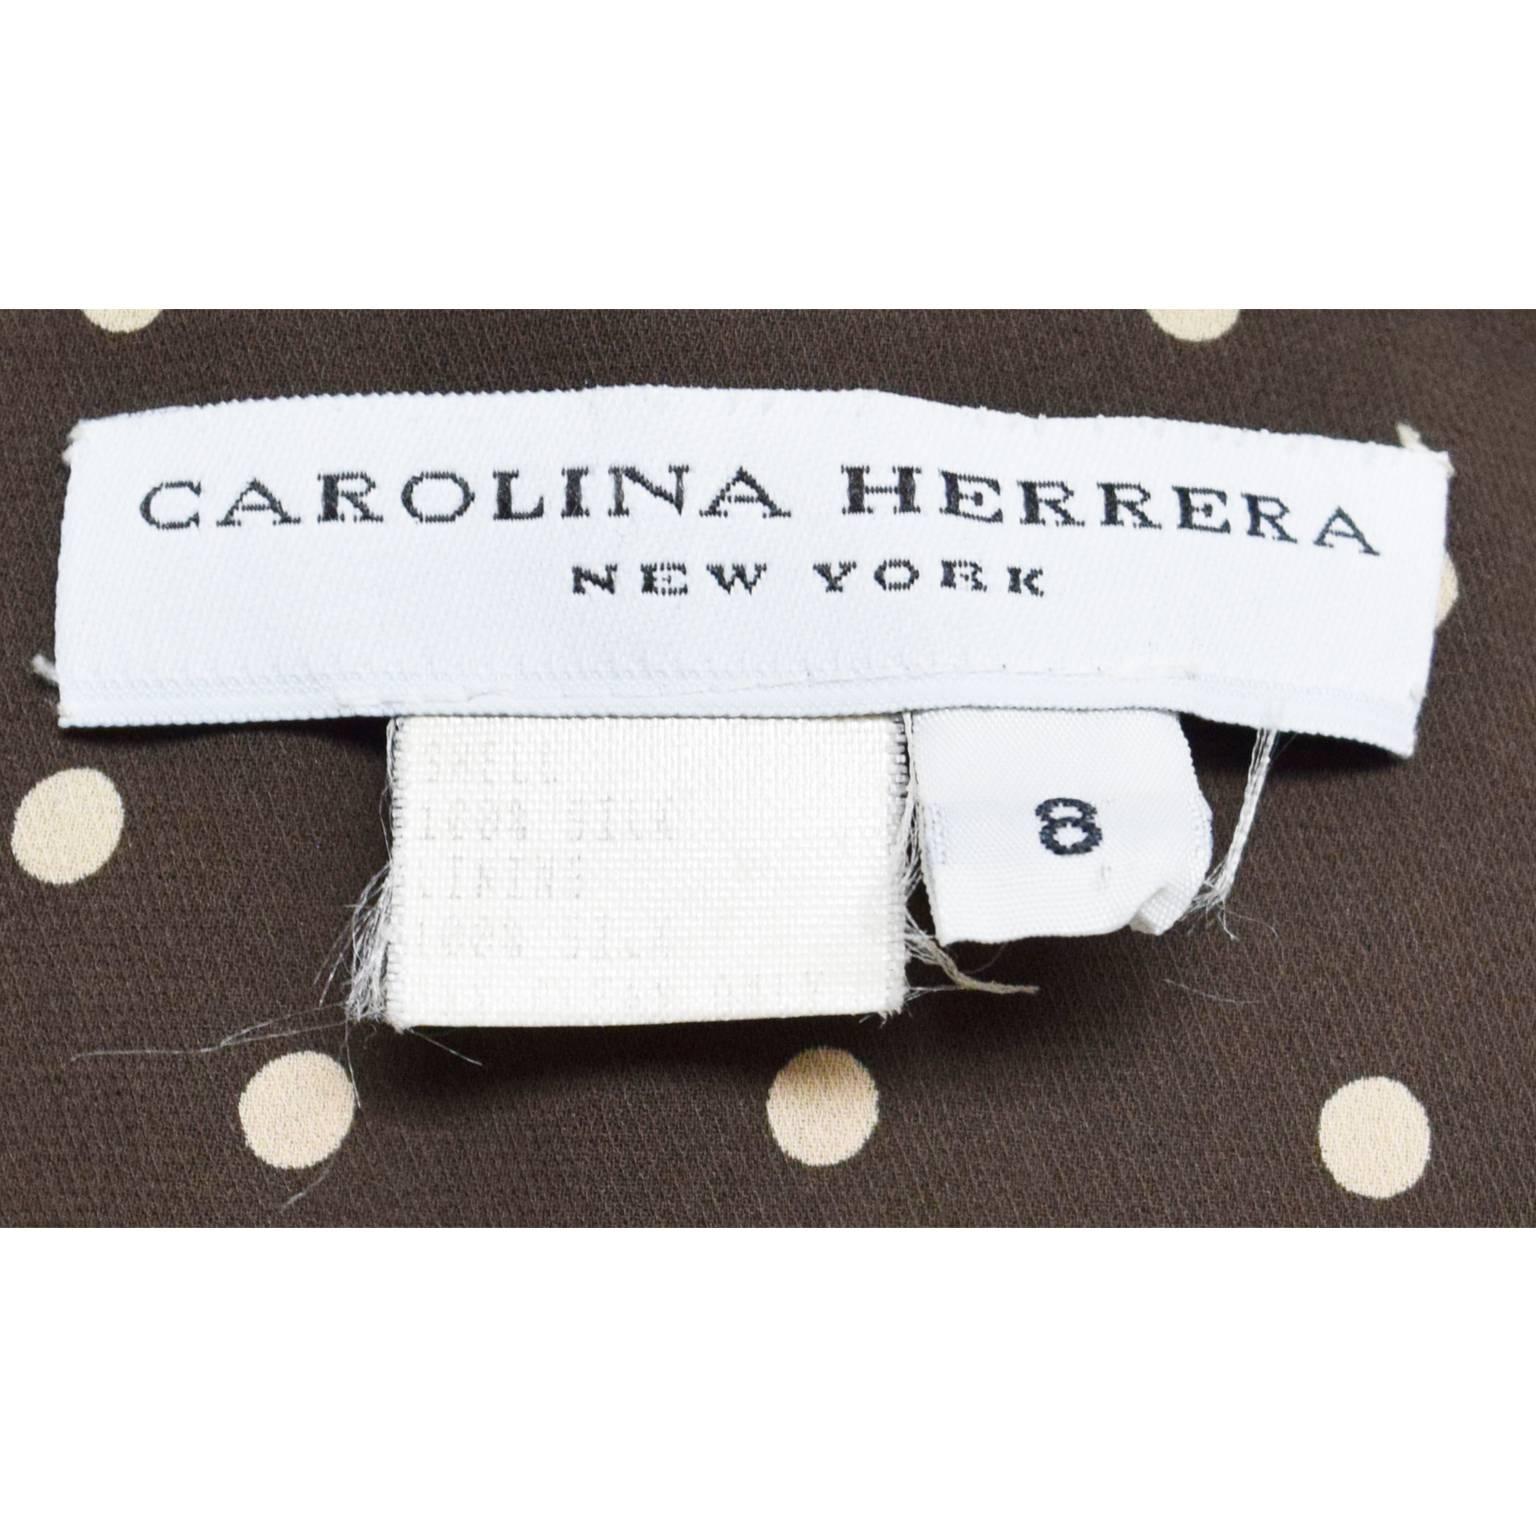 Carolina Herrera Brown and Cream Polka Dot Dress with Florette Embellishment In Excellent Condition For Sale In Henrico, VA